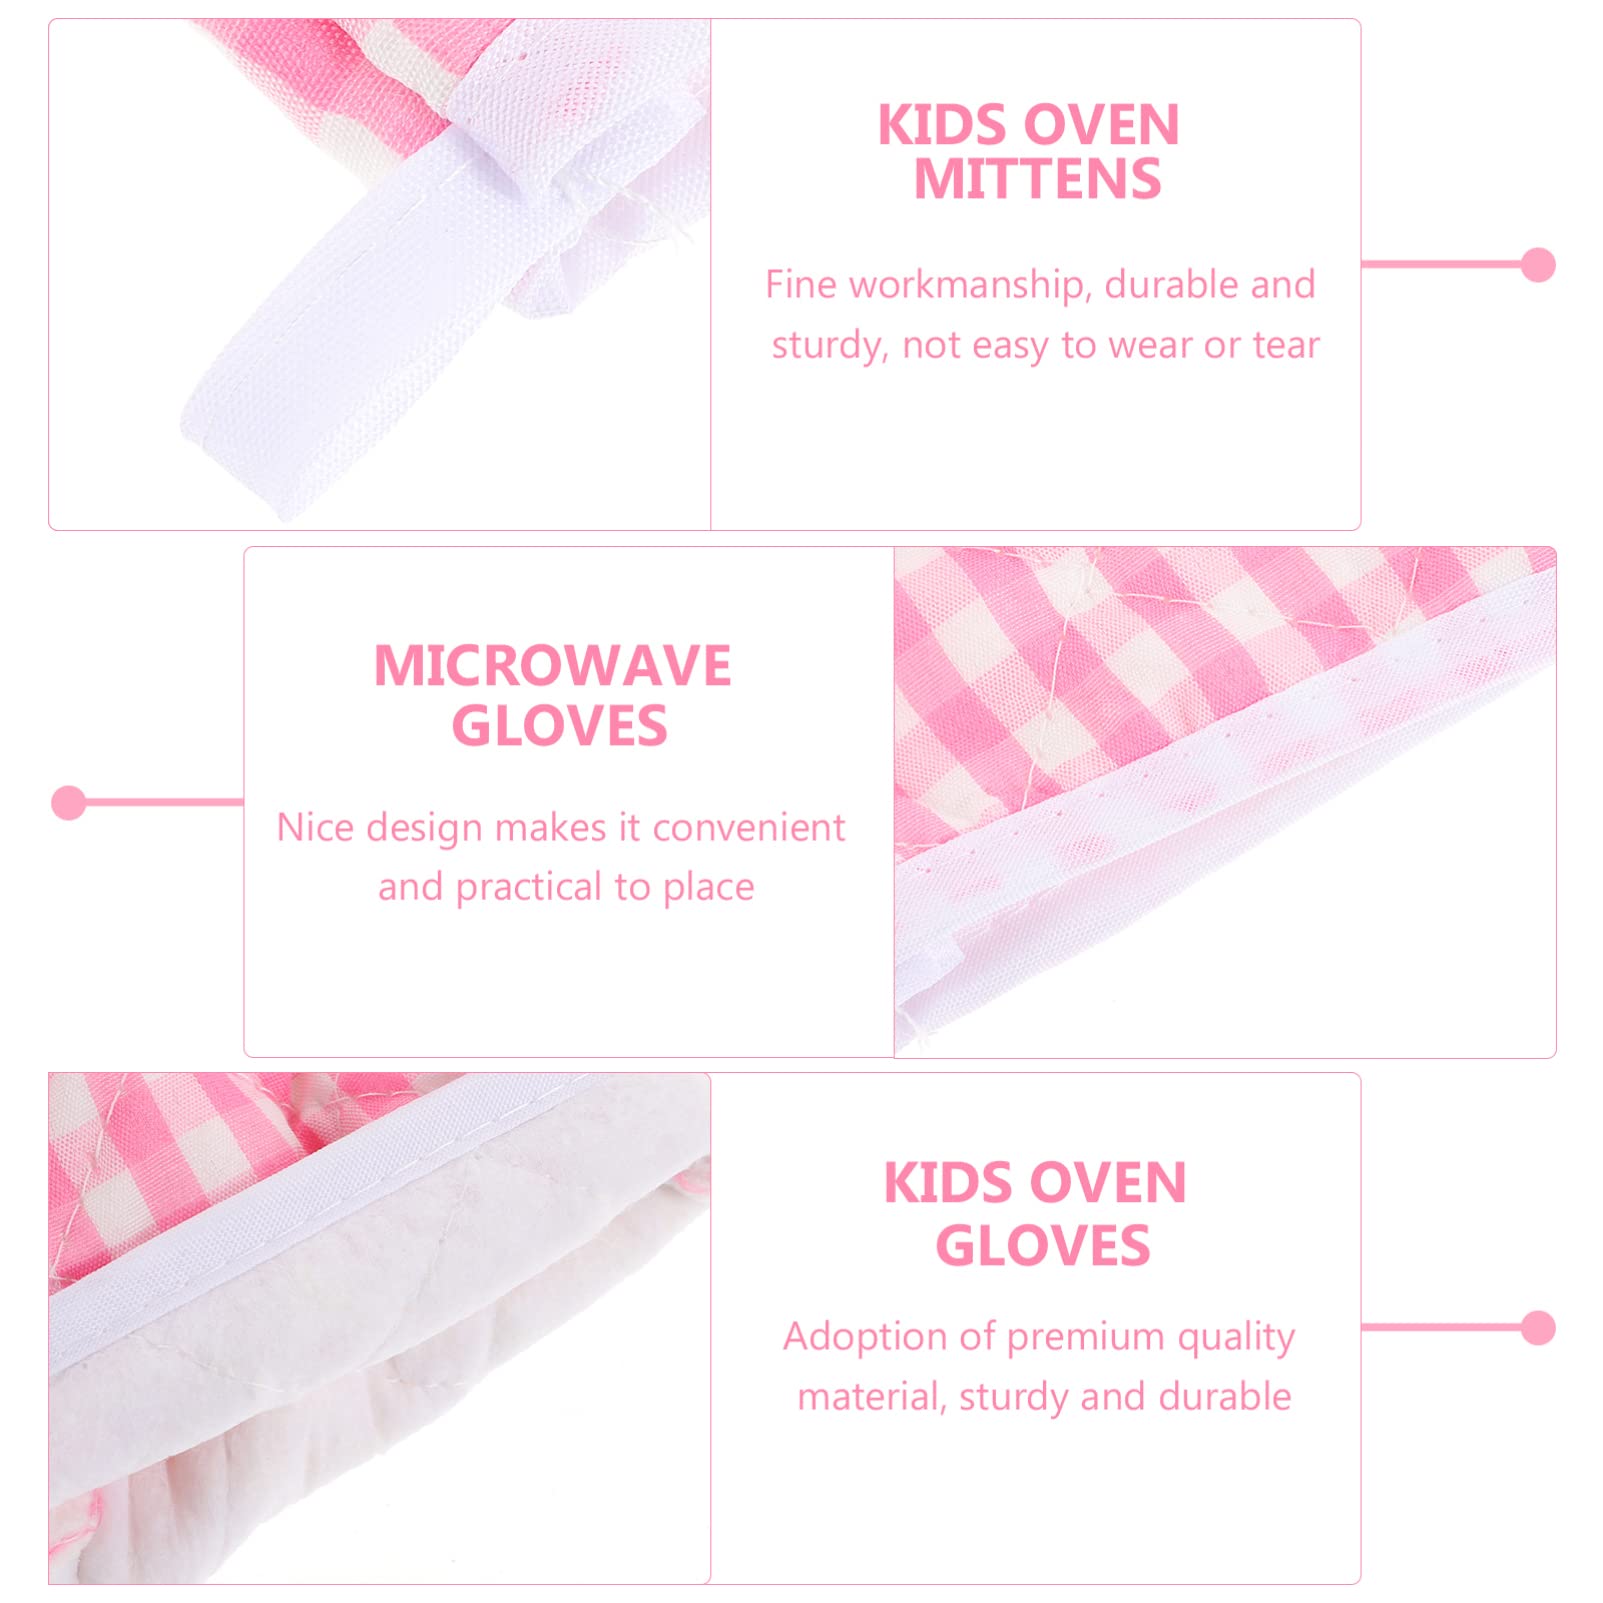 cabilock Oven Mitts Glove Heat Insulation Mitts Red Grid Kitchen Microwave Oven Gloves Mitts Anti-Scald Baking Gloves for Children Adult Cooking Gloves, 1 Pair, 7x4.7 inch (Pink)